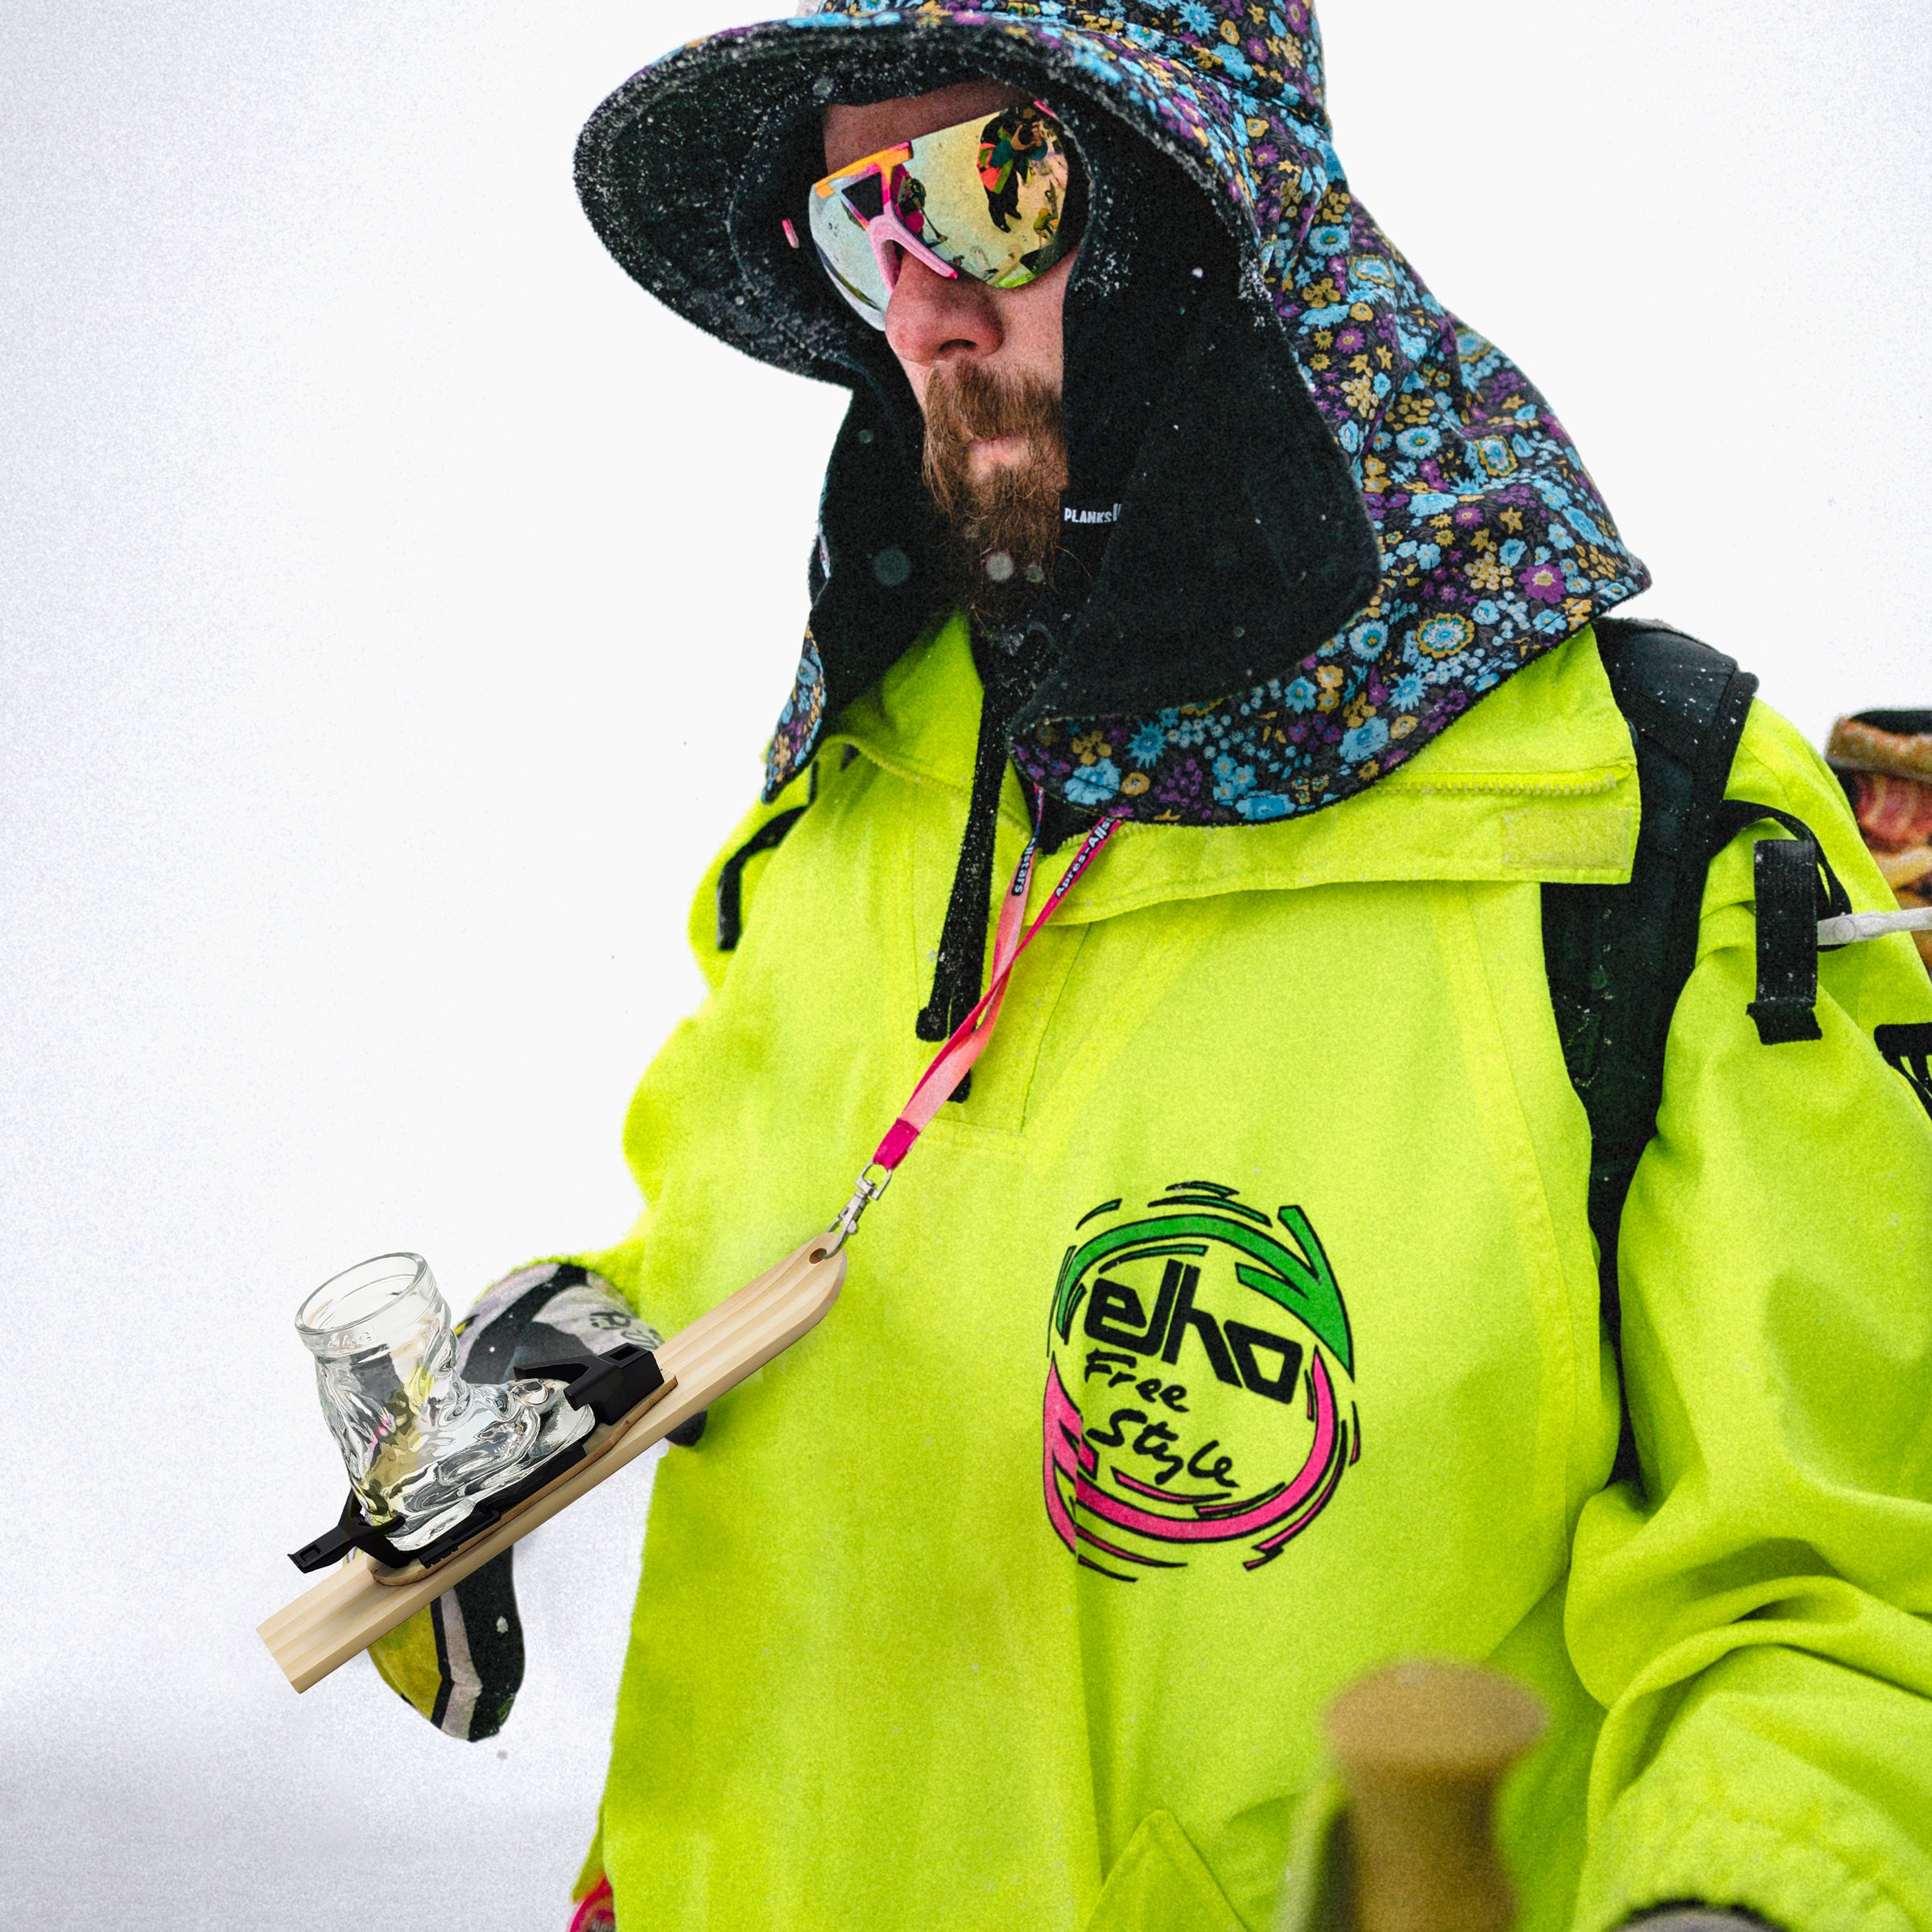 Photo of Michi, 1 of the Apres Allstar founders, in a yellow jacket, colourful hat and sunglasses wearing his mini-ski on a Apr√®s Allstar lanyard around his neck in the snow. The mini-ski has been fitted out with the Apr√®s Allstar bindings boot shot glass & lanyard.